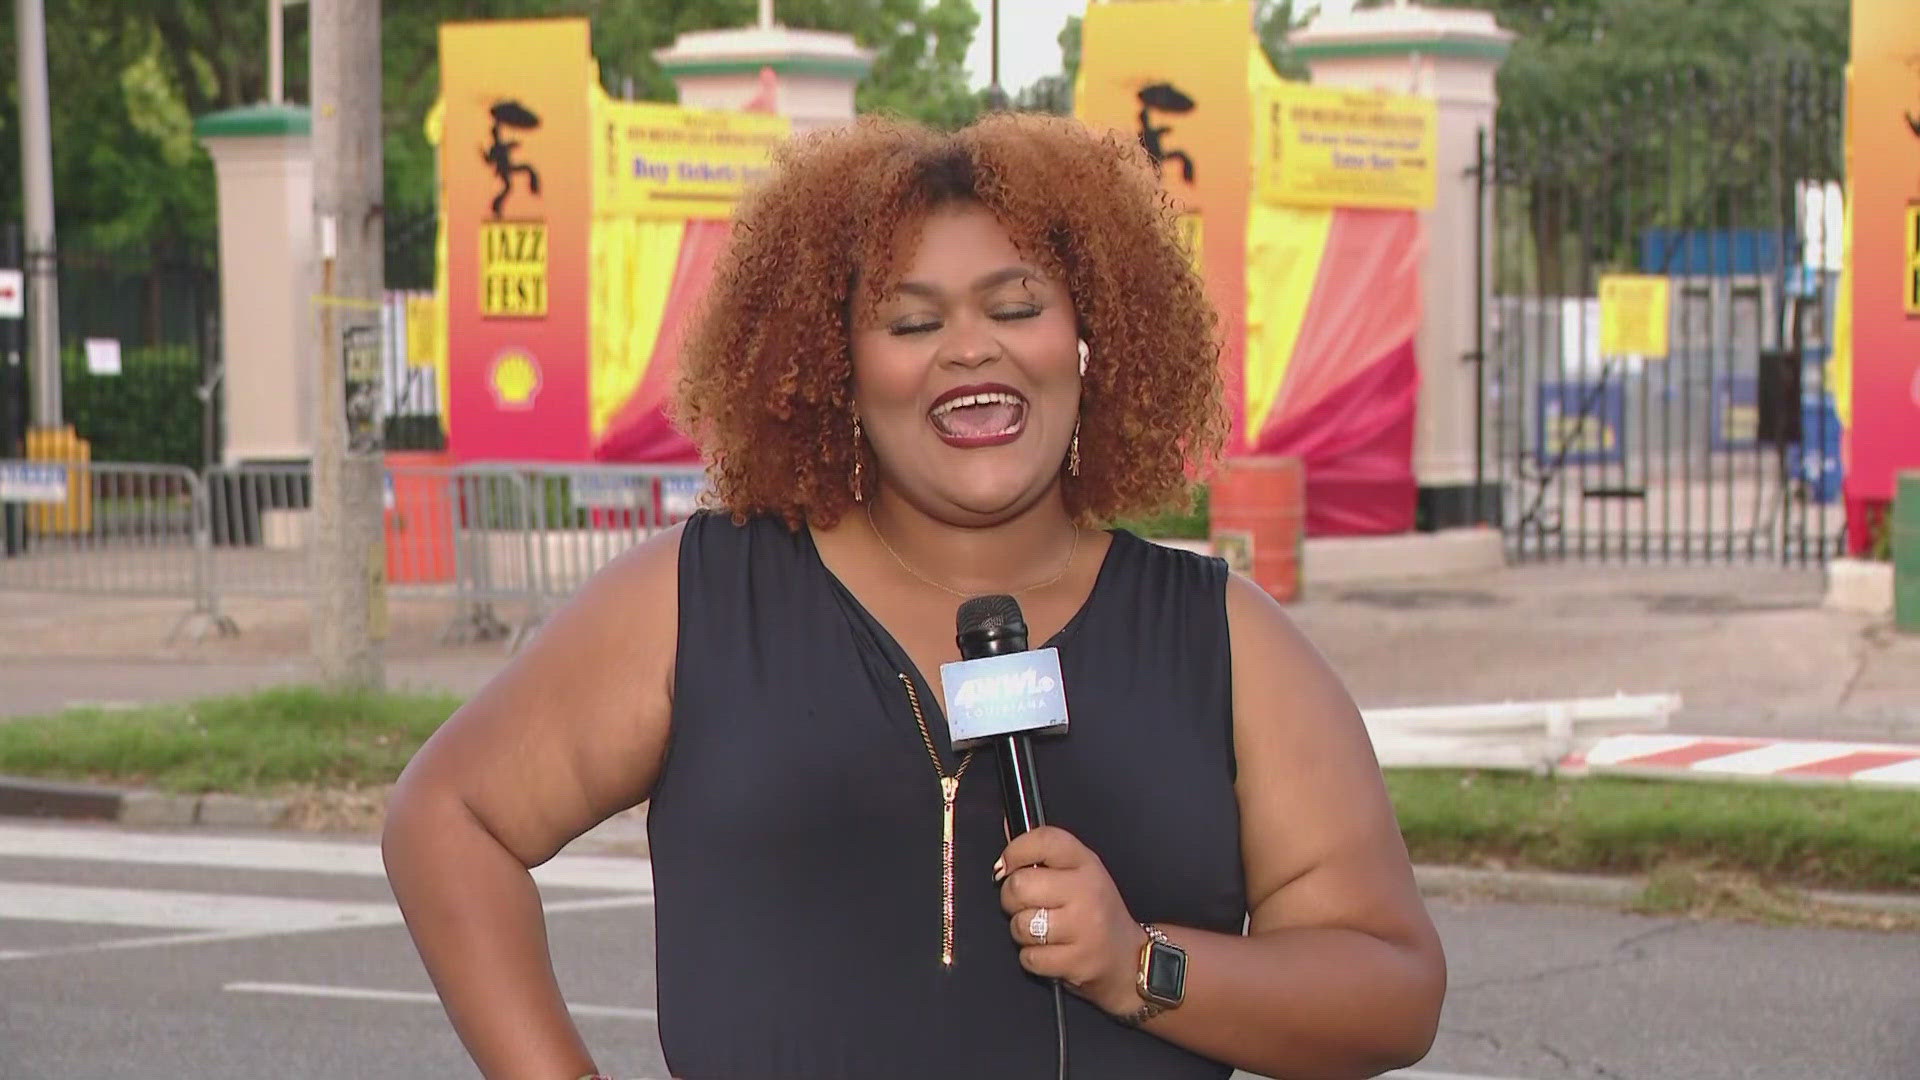 WWL's Leigha McNeil gives a preview of what to expect on the first Friday of Jazz Fest